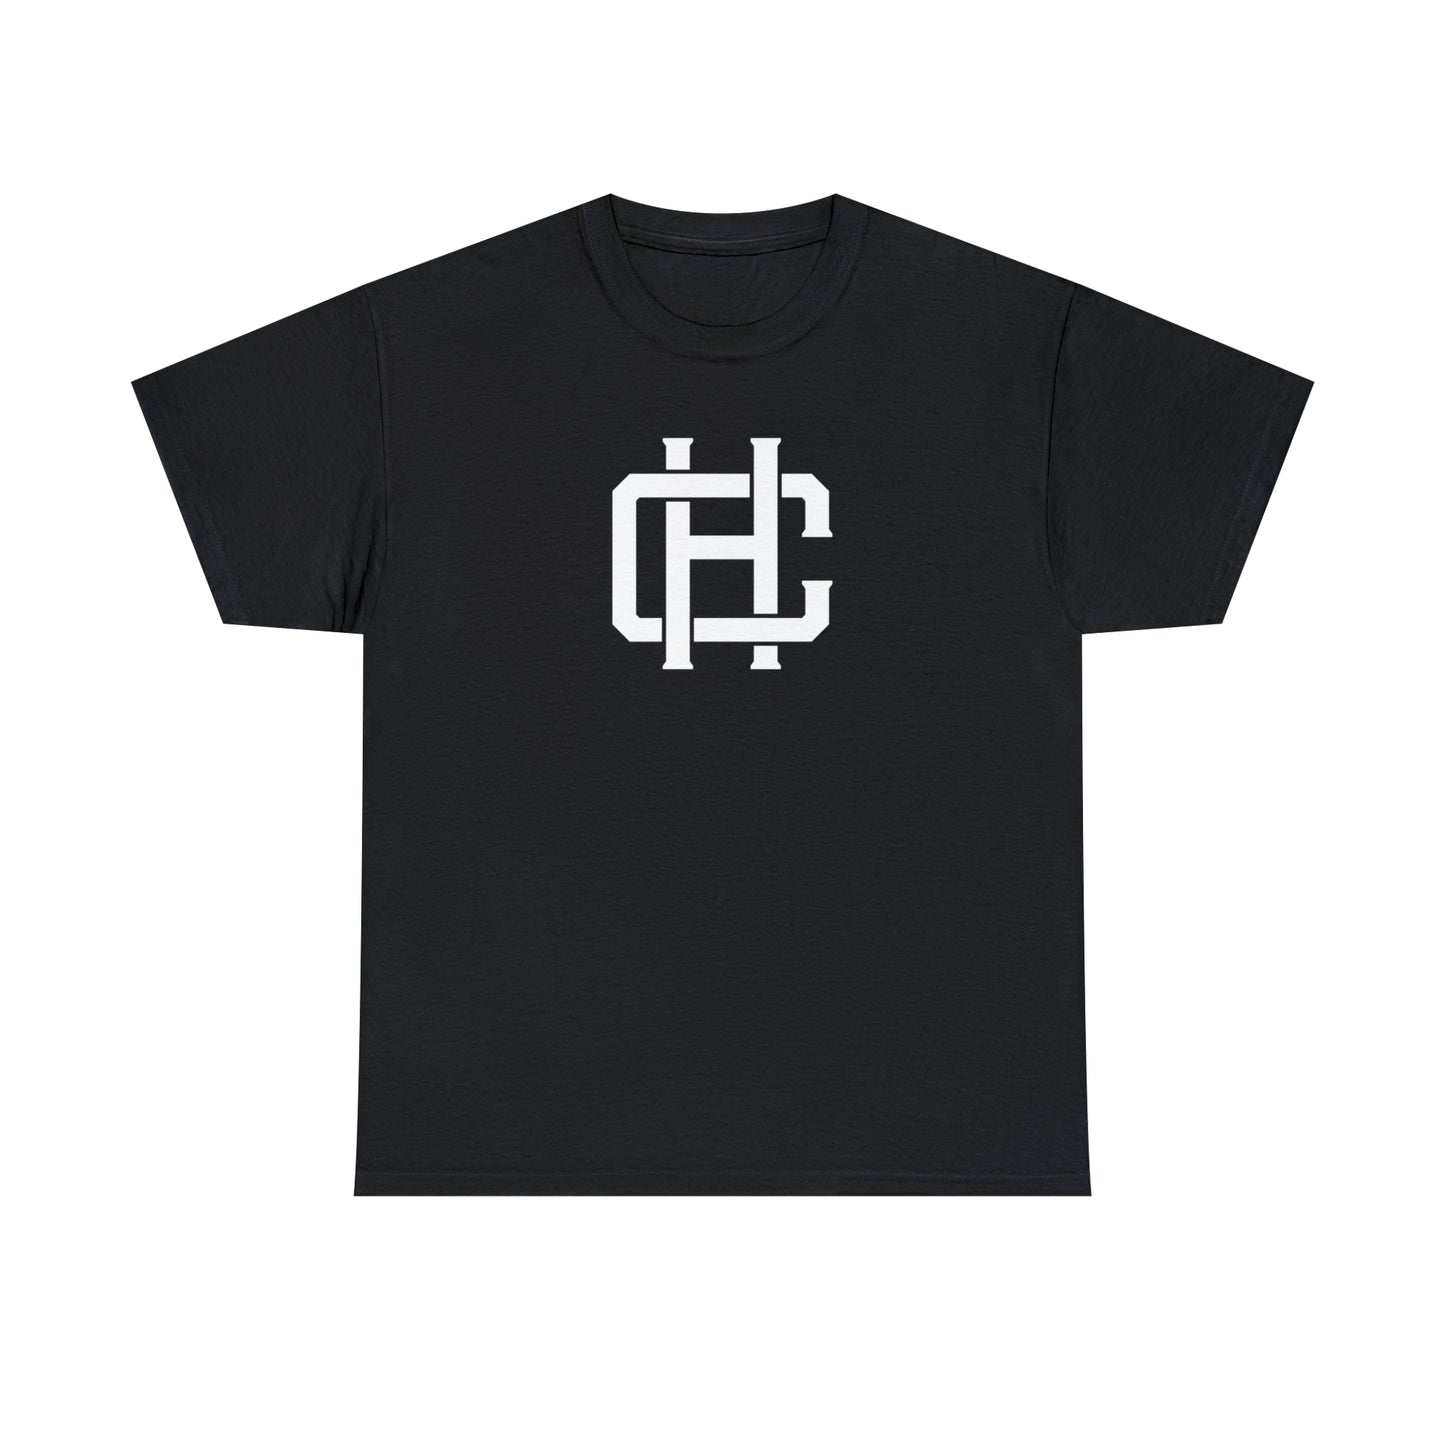 Chase Hungate "CH" Tee